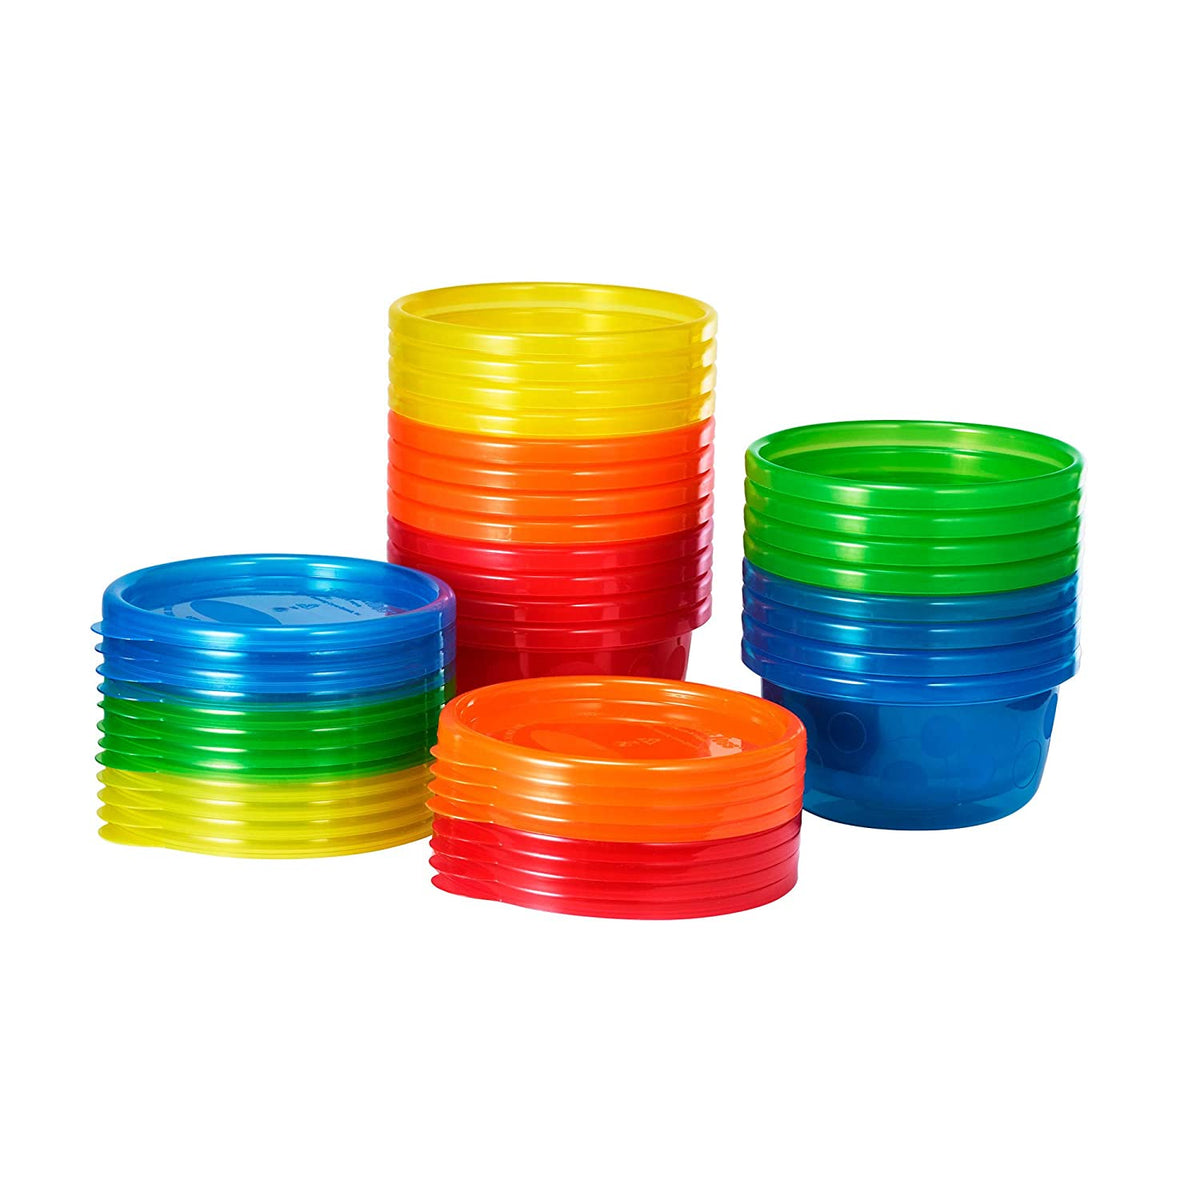 Learning Curve Take & Toss Bowls and Lids 8 oz